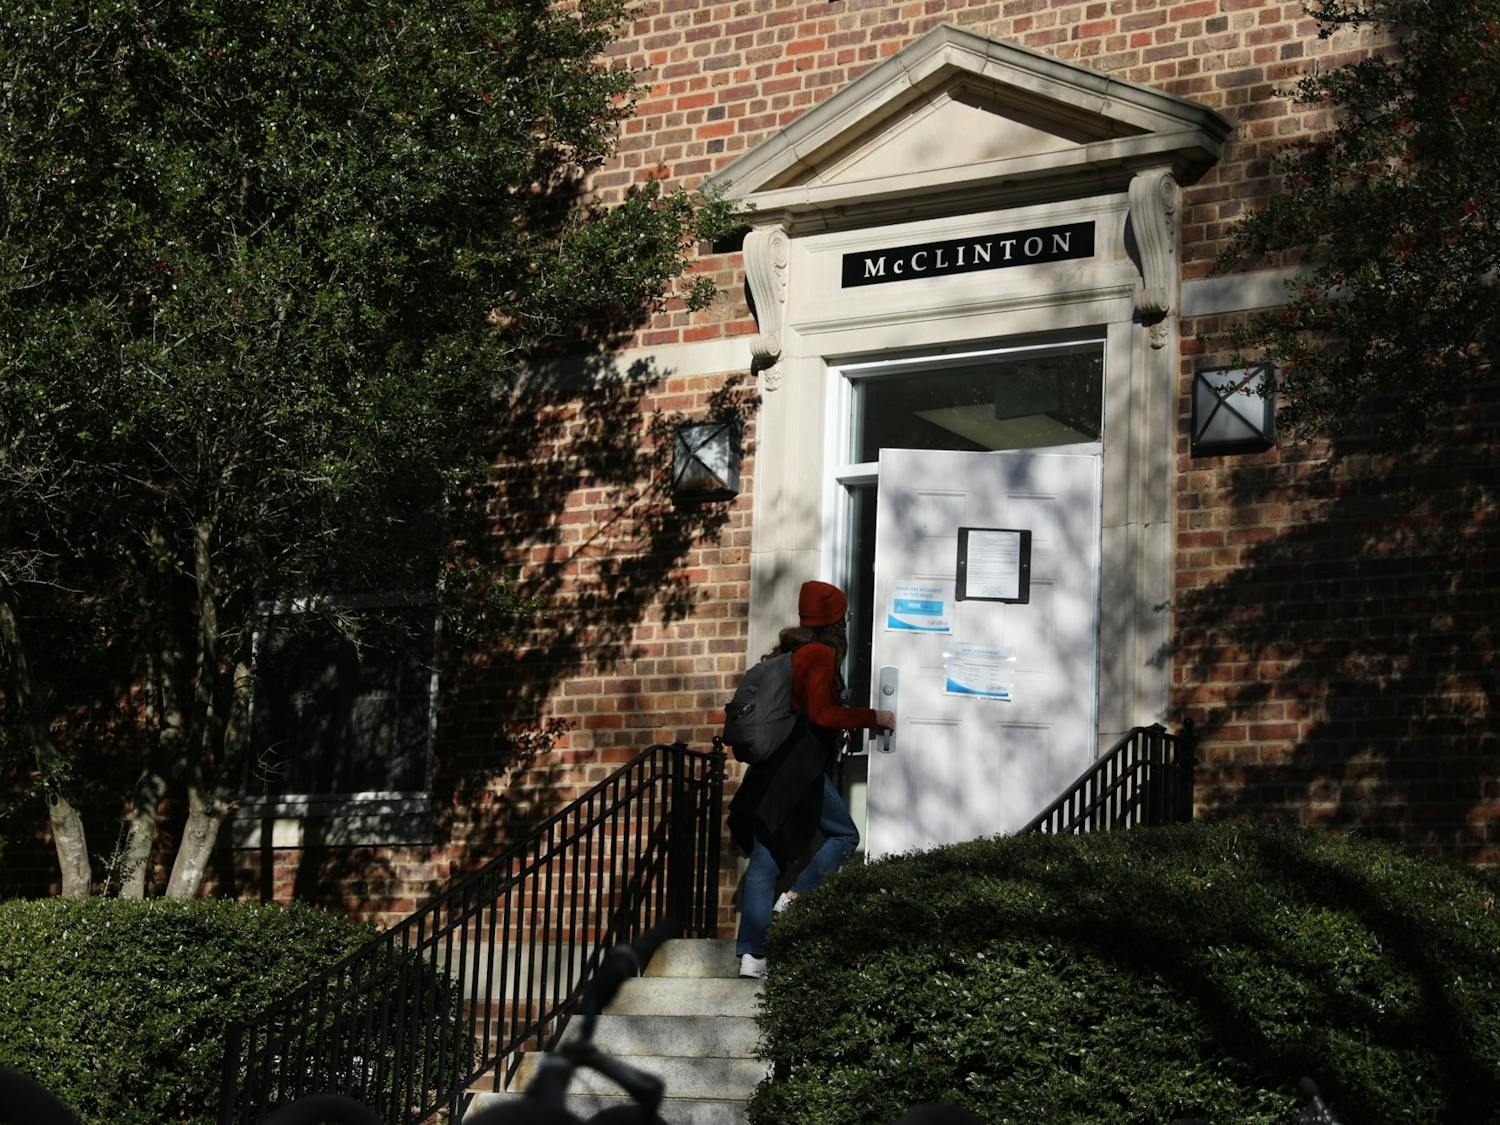 A student walks into McClinton Residence Hall on Tuesday, Jan. 11, 2022. Residence Hall One, formerly the Charles B. Aycock Residence Hall, was recently renamed after Hortense McClinton, the first Black faculty member at the University, on Friday, Dec. 3, 2021.